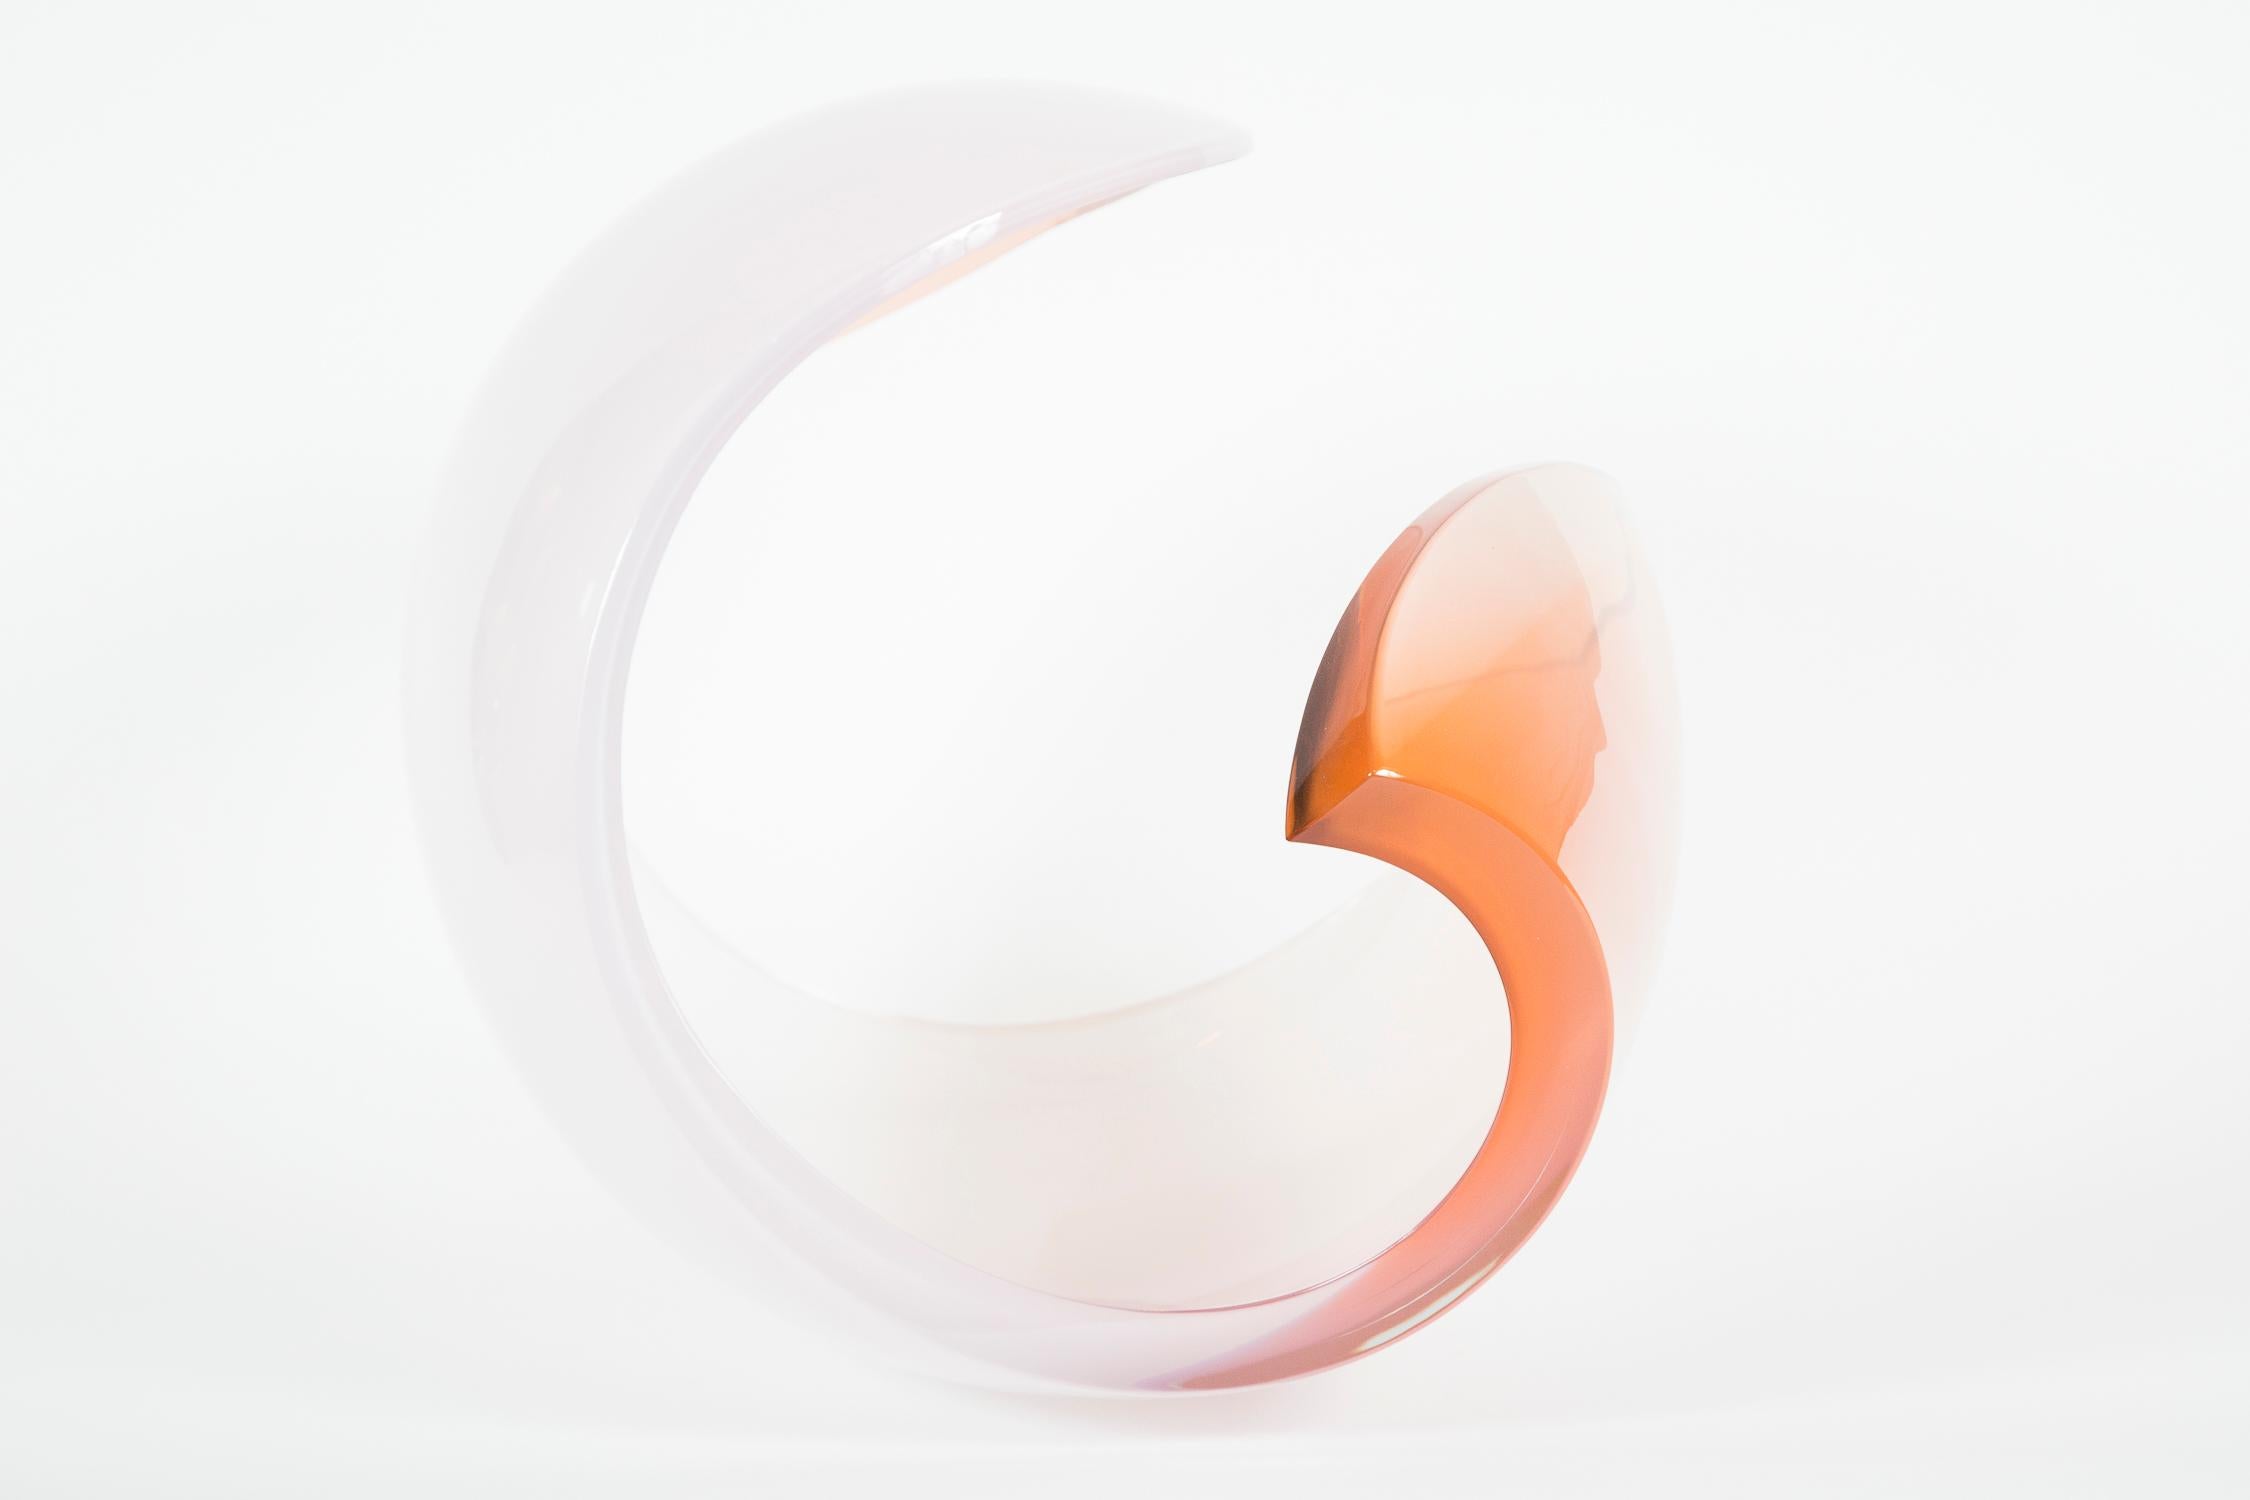 Swedish Planet in White & Apricot glass sculpture and centrepiece by Lena Bergstrom